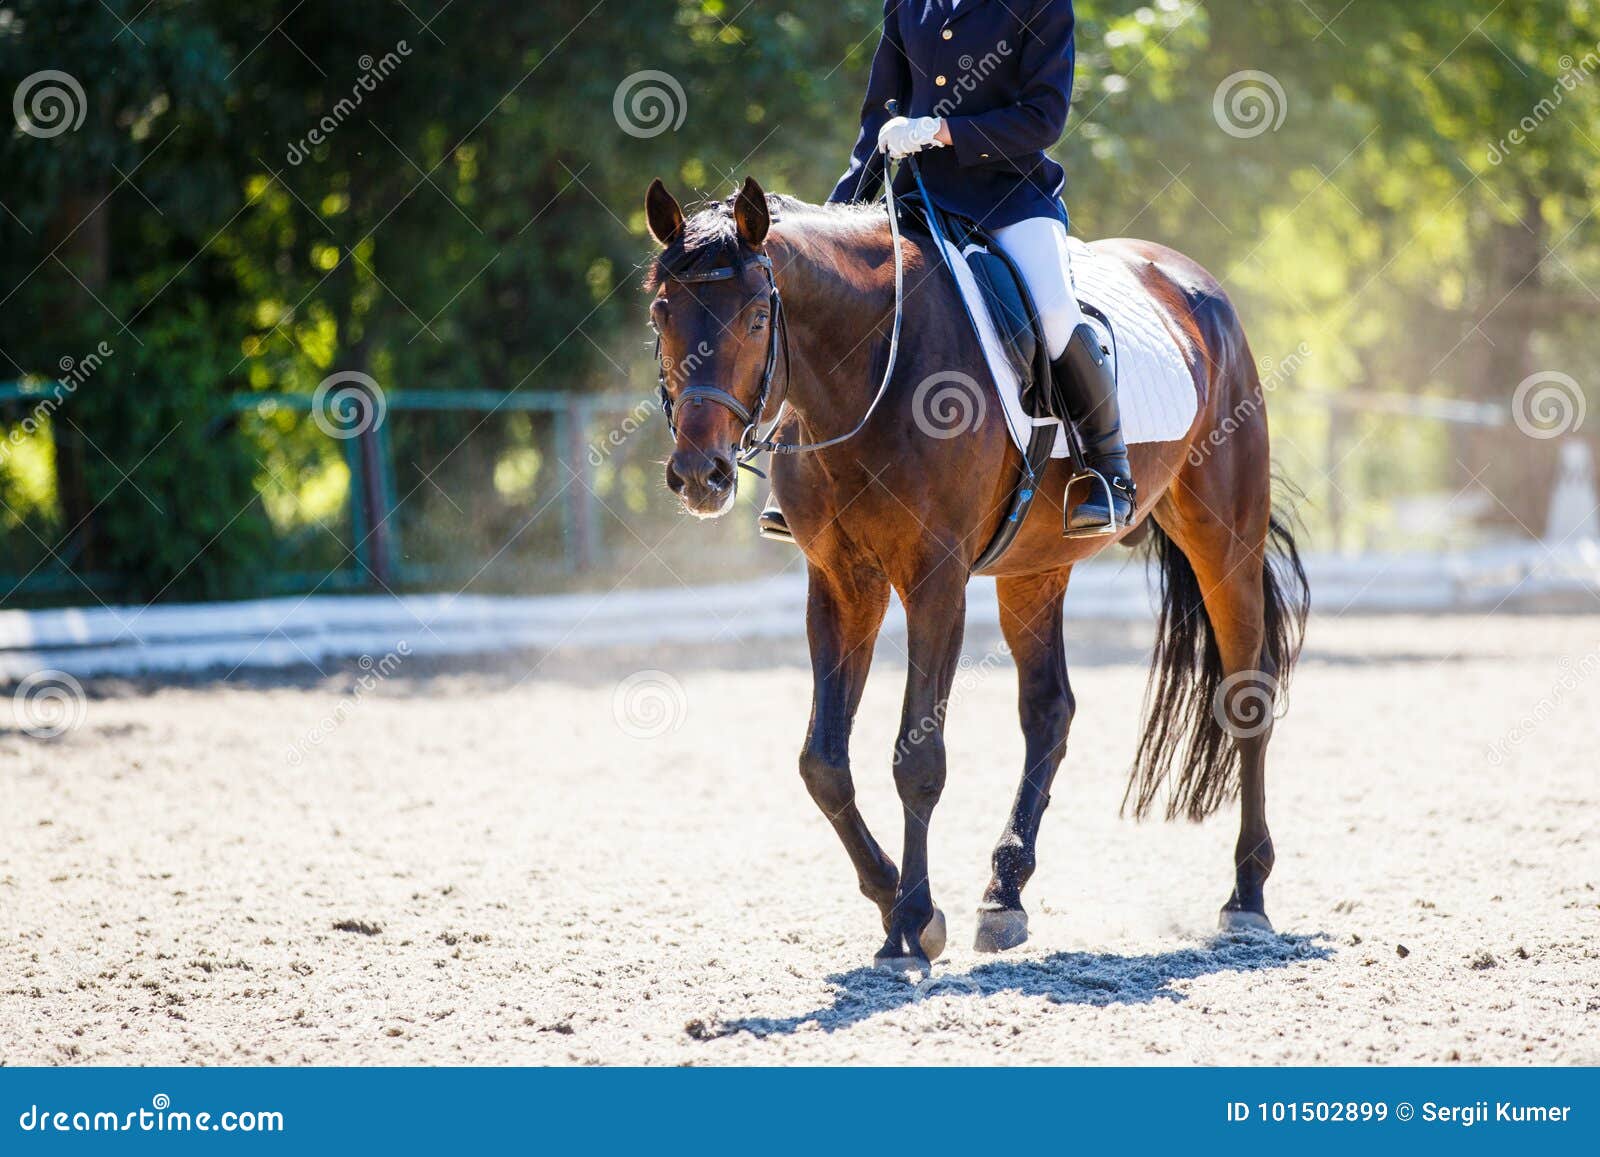 bay horse with rider walking on dressage contest